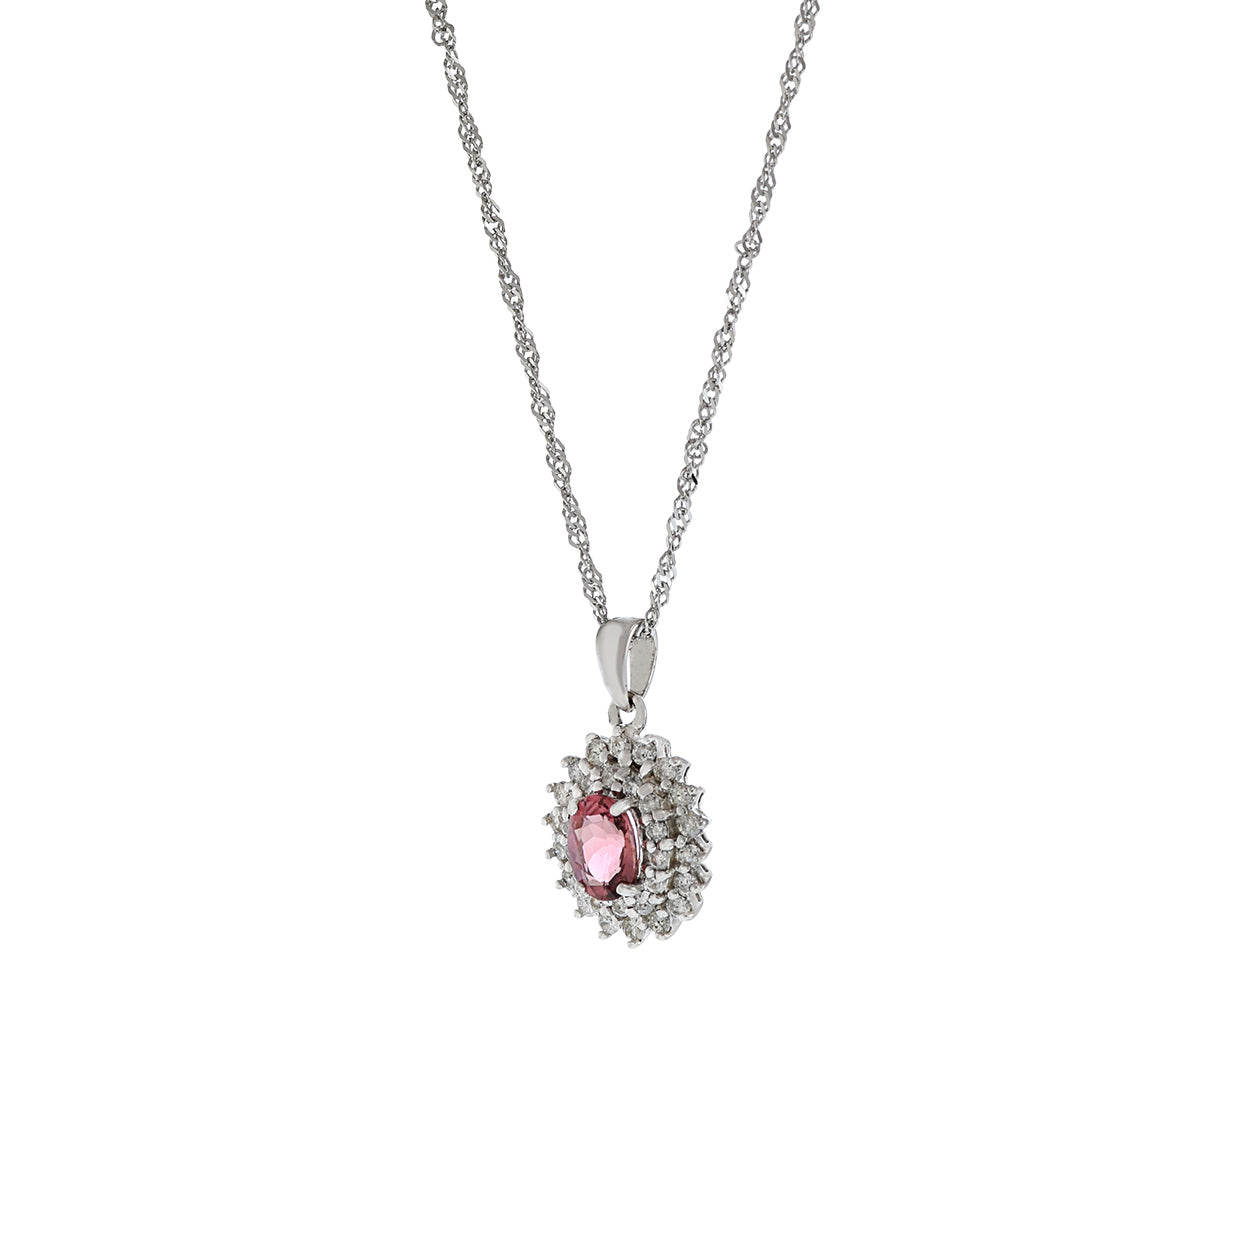 18KT White Gold Oval Pink Sapphire And Diamond Pendant Necklace